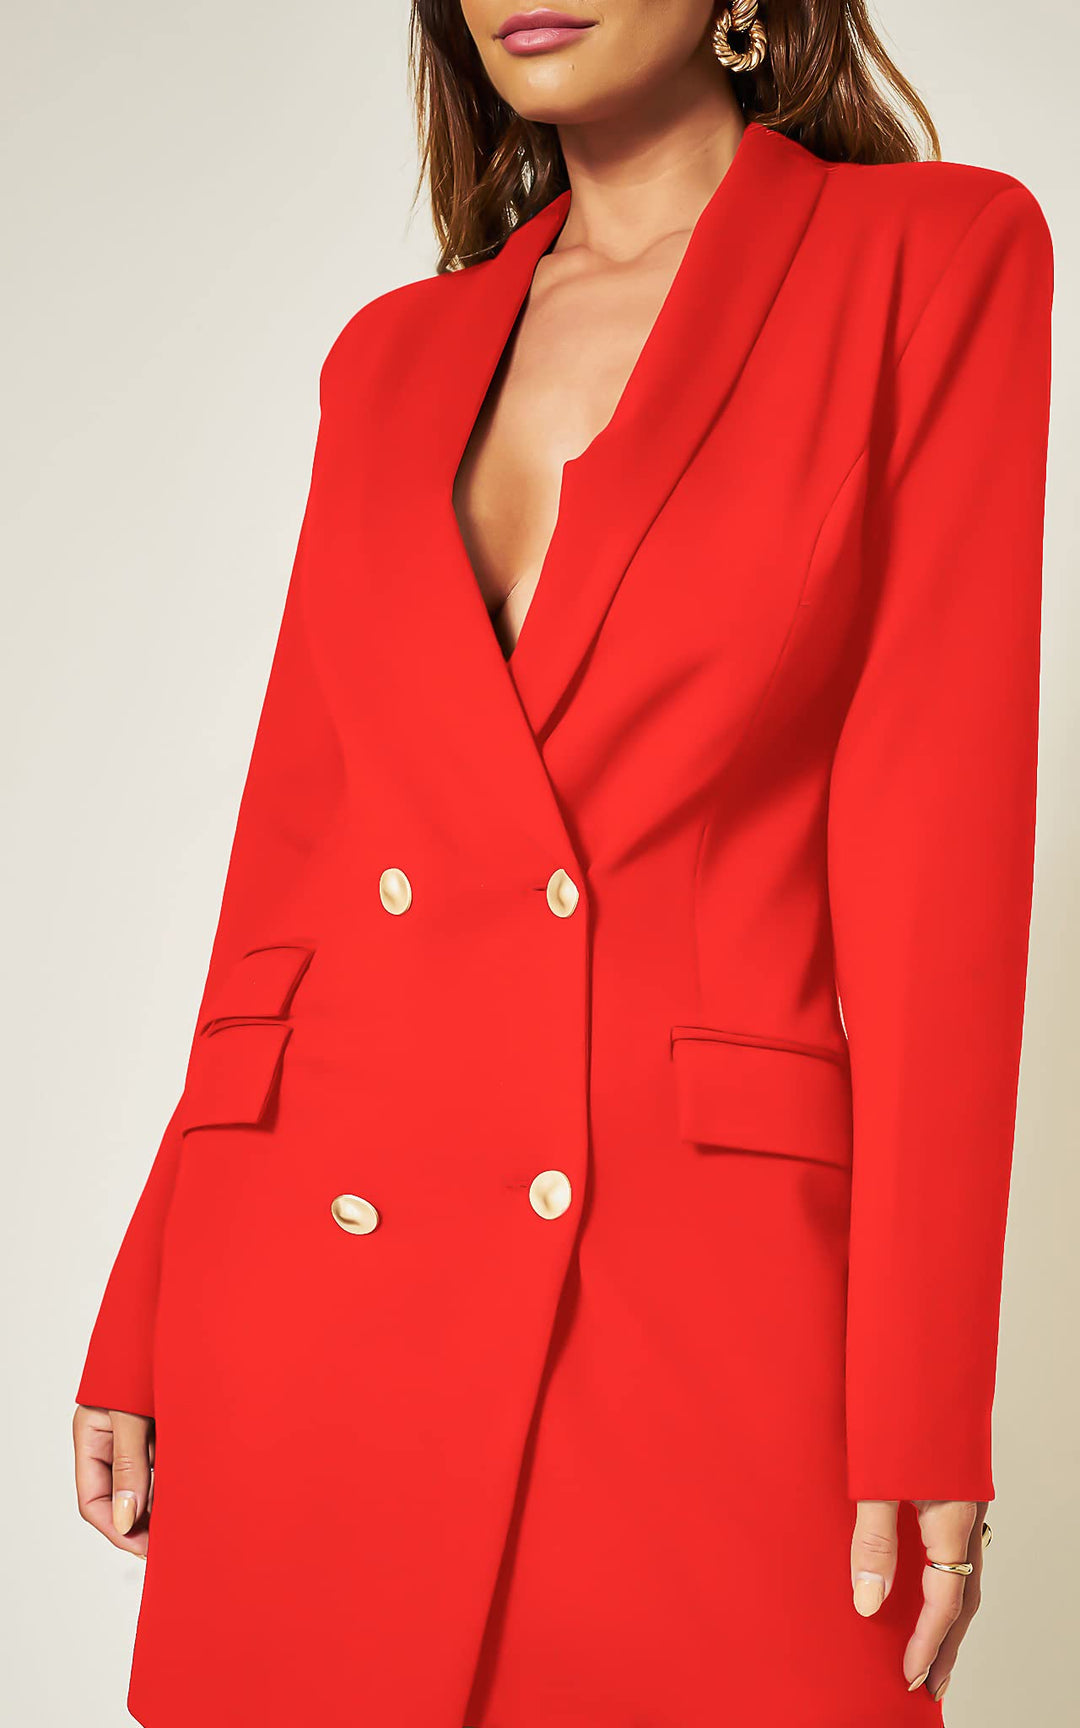 Luxe Stain Breasted Asymmetric Blazer Dress In Red